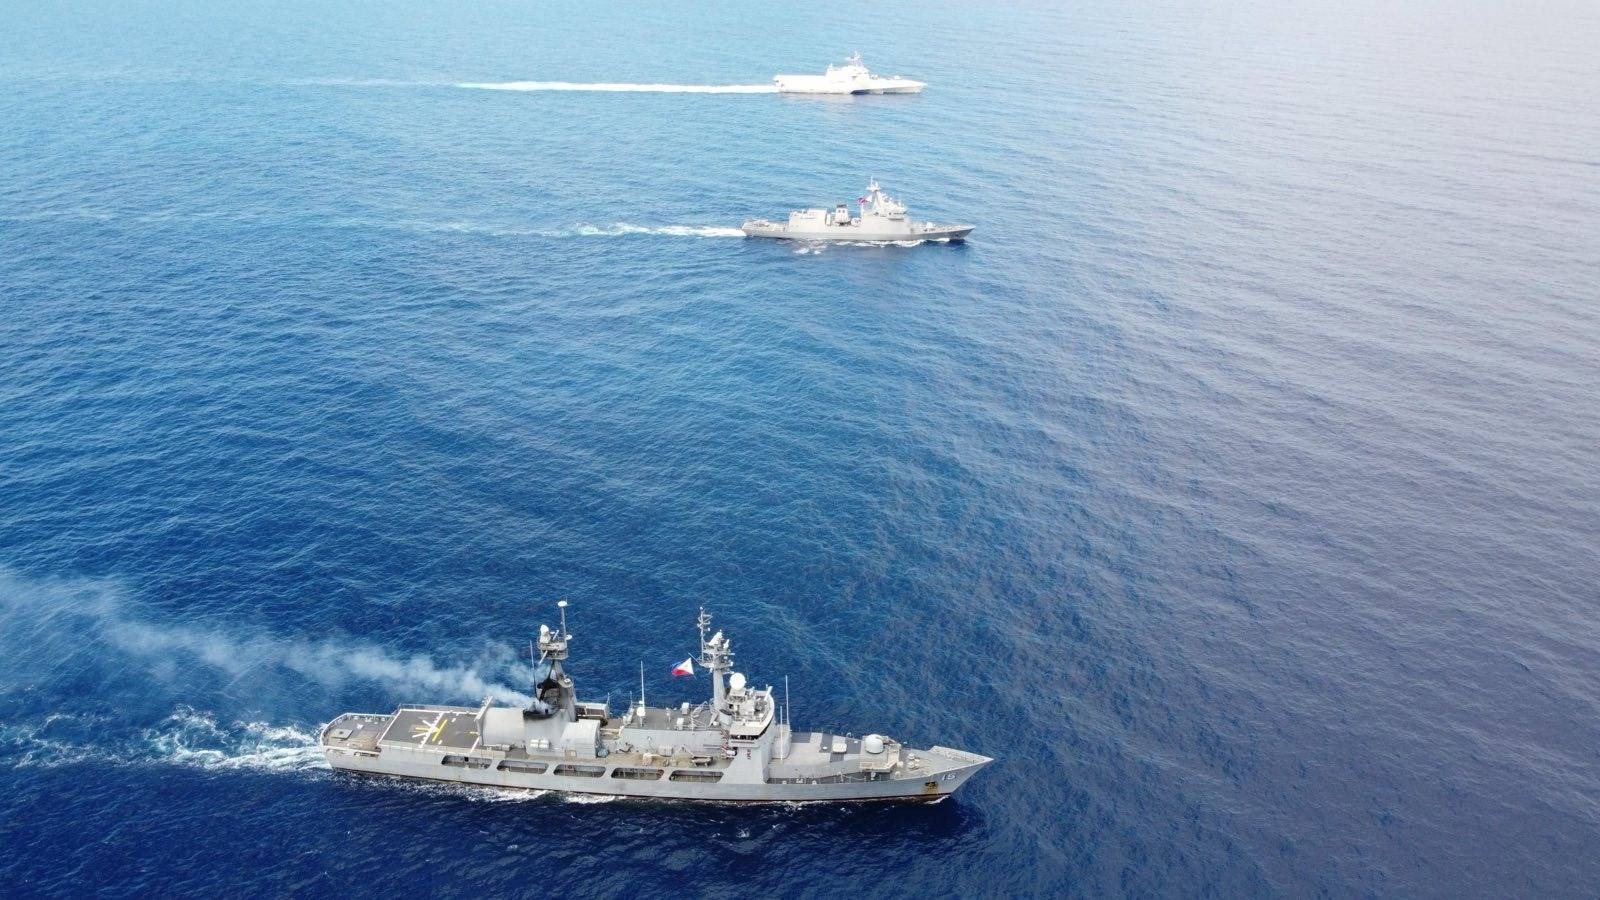 Philippine Navy warships BRP Gregorio Del Pilar (PS15) and BRP Jose Rizal (FF150), along with the USS Gabriel Gifford (LCS 10) conducted tactical maneuvers in the West Philippine Sea on Thursday afternoon.